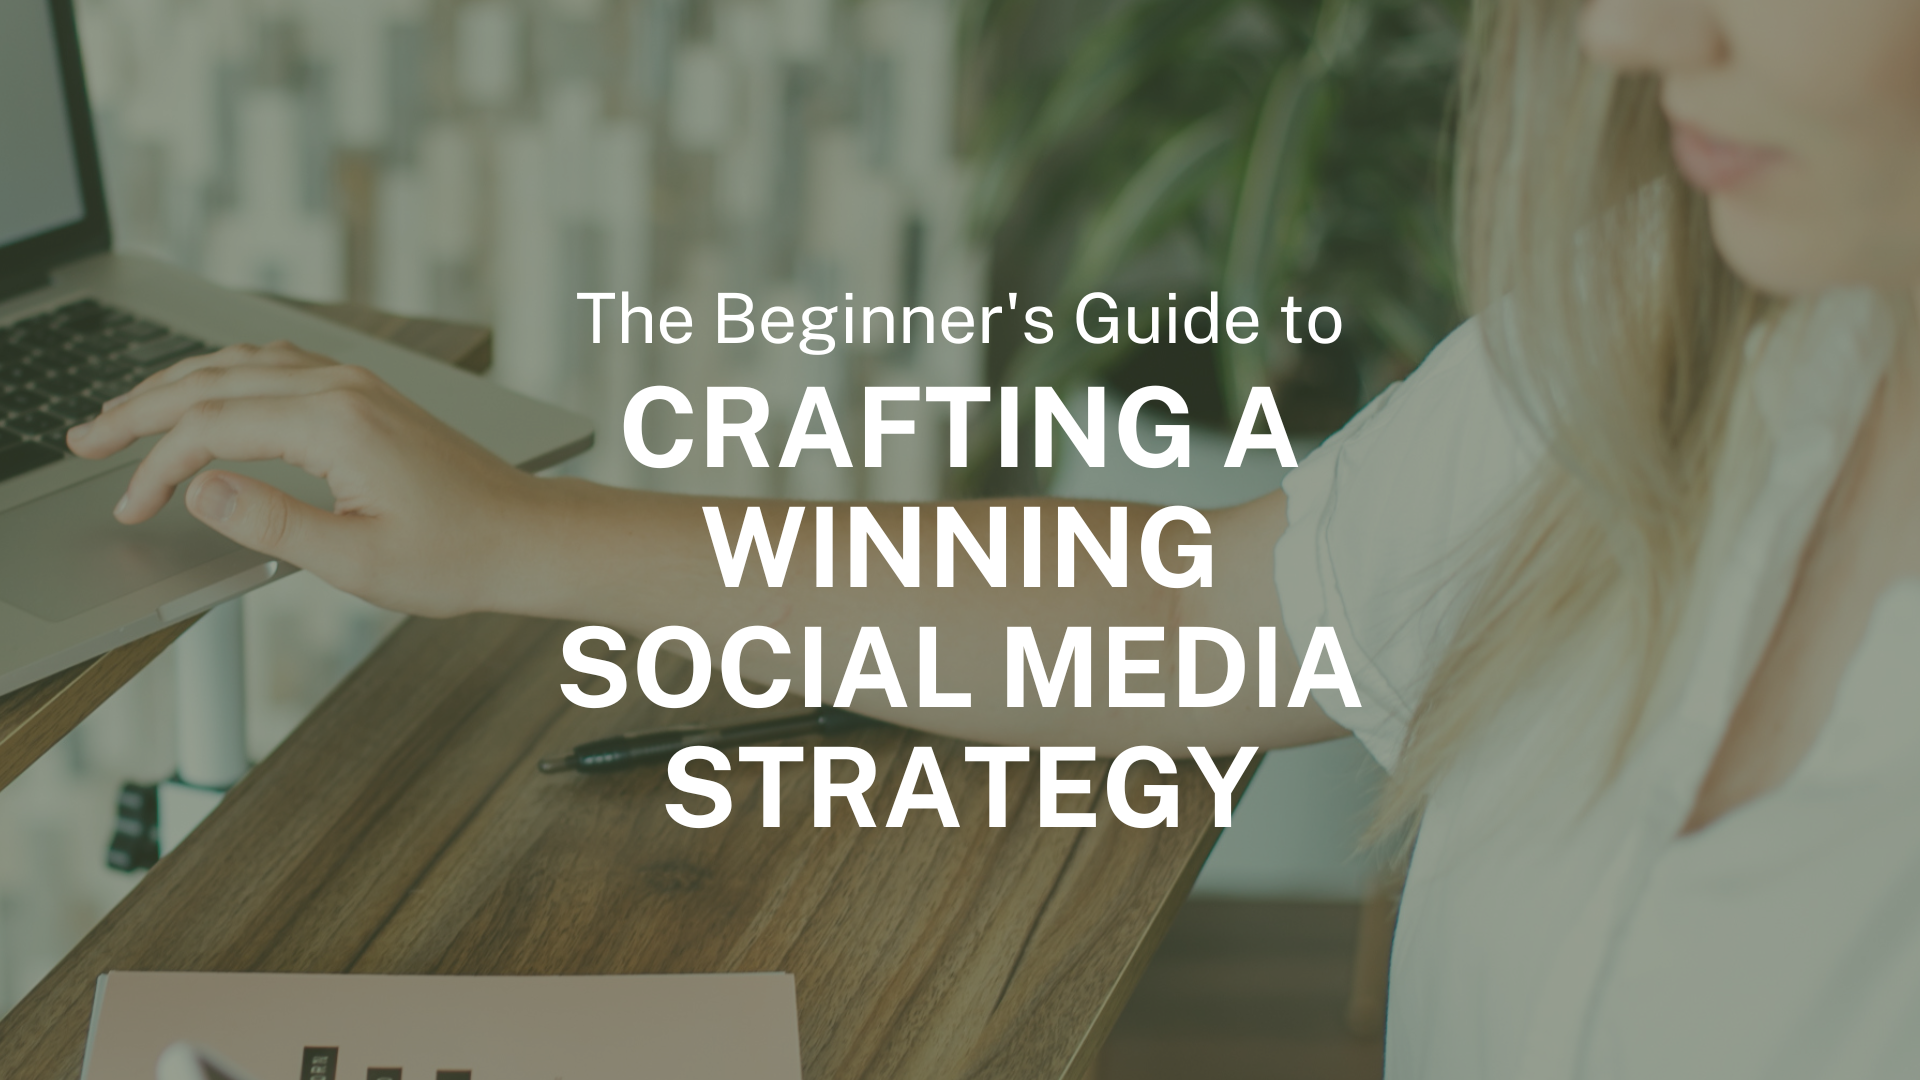 Graphic reads: The Beginner's Guide to Crafting a Winning Social Media Strategy